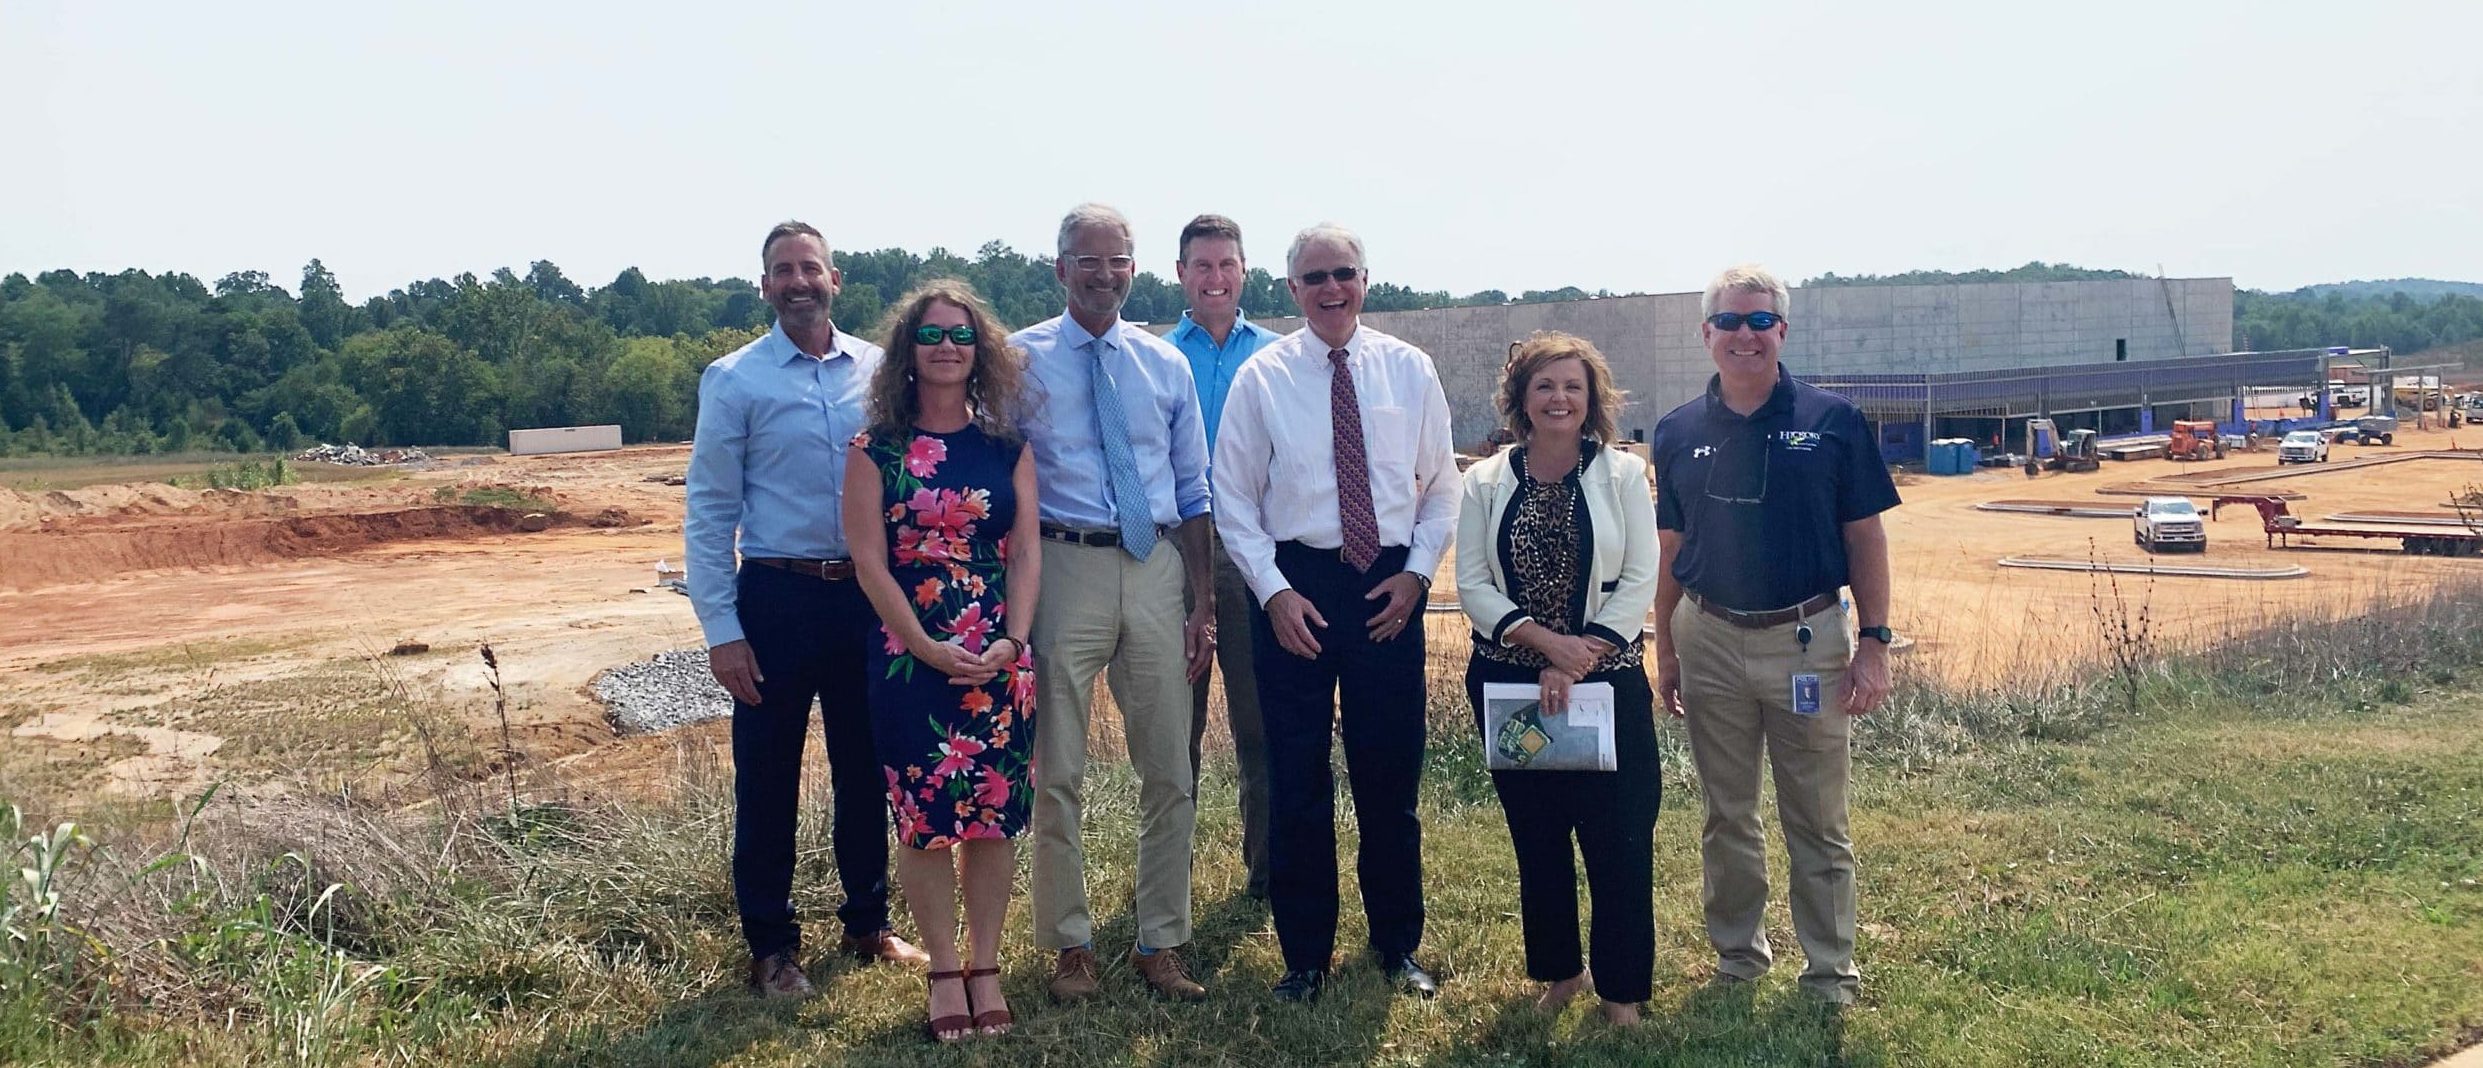 Catawba County officials build economic development success at Trivium Corporate Center with collaboration